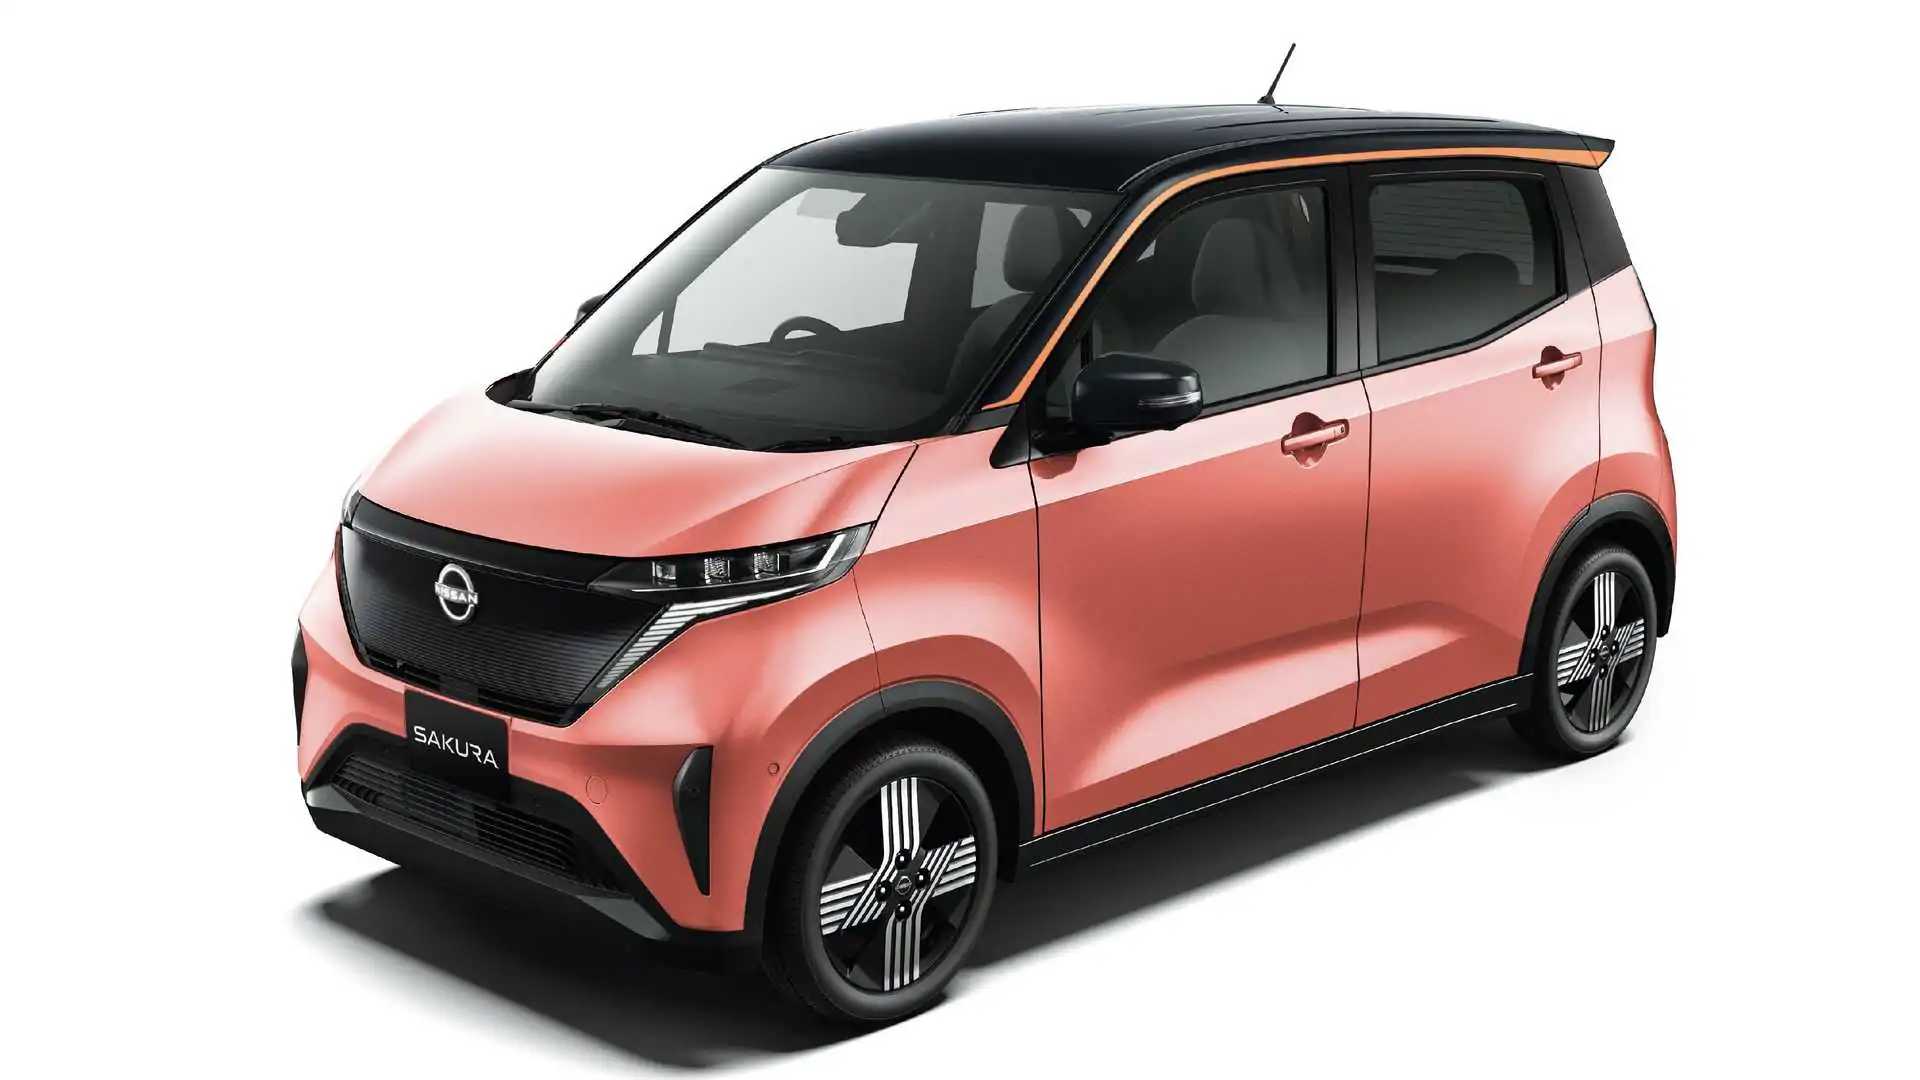 nissan has plans to bring lower-cost evs to market. but when?